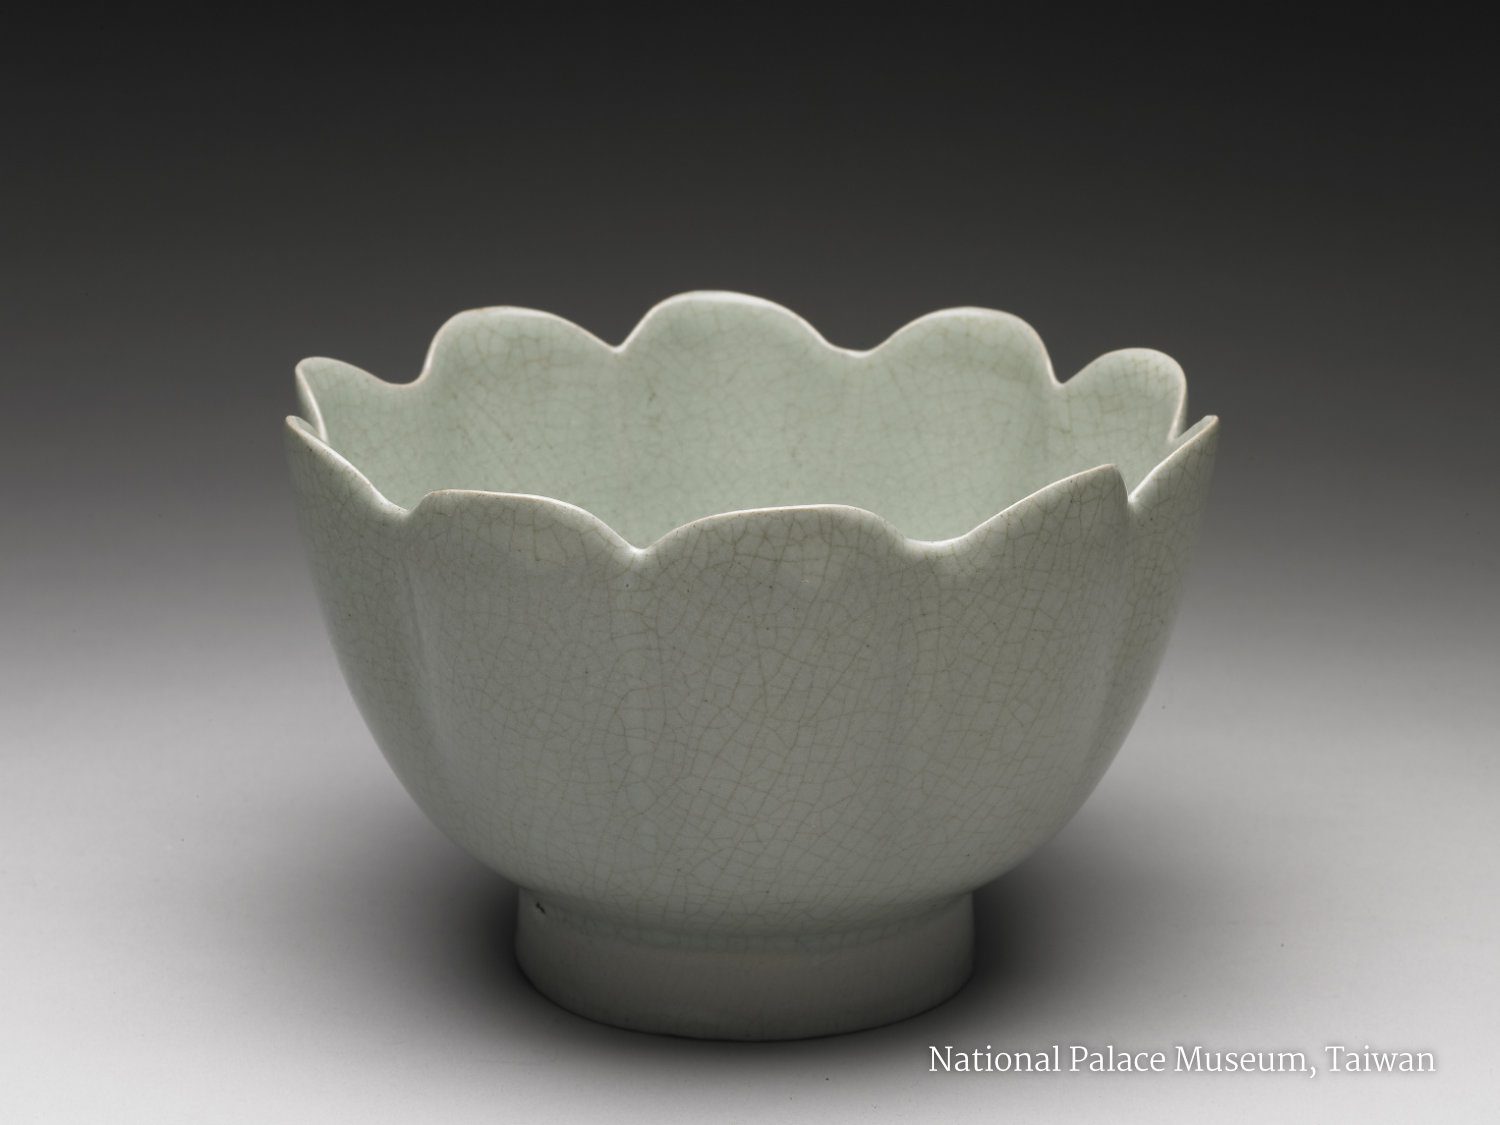 A Song Dynasty Ru Ware wine warming bowl showing the typical cracked surface glaze effect